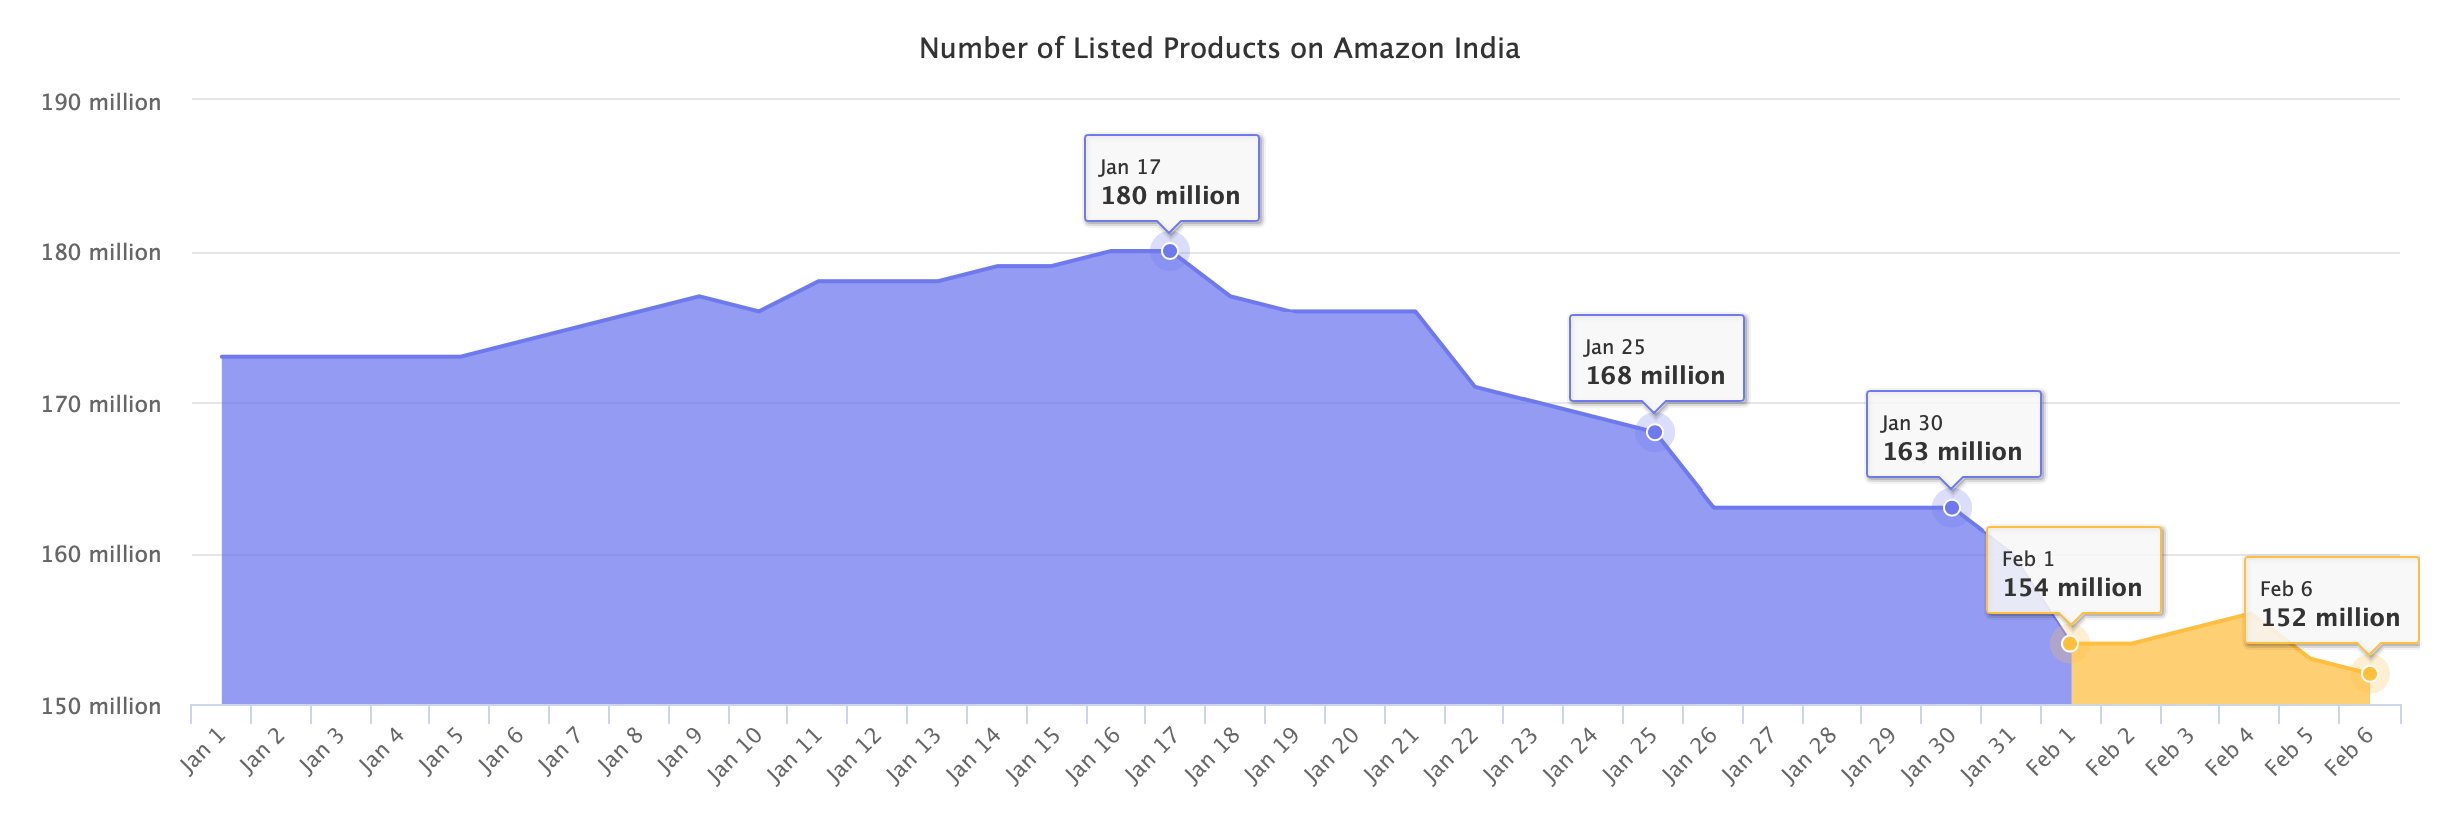 Number of Listed Products on Amazon India